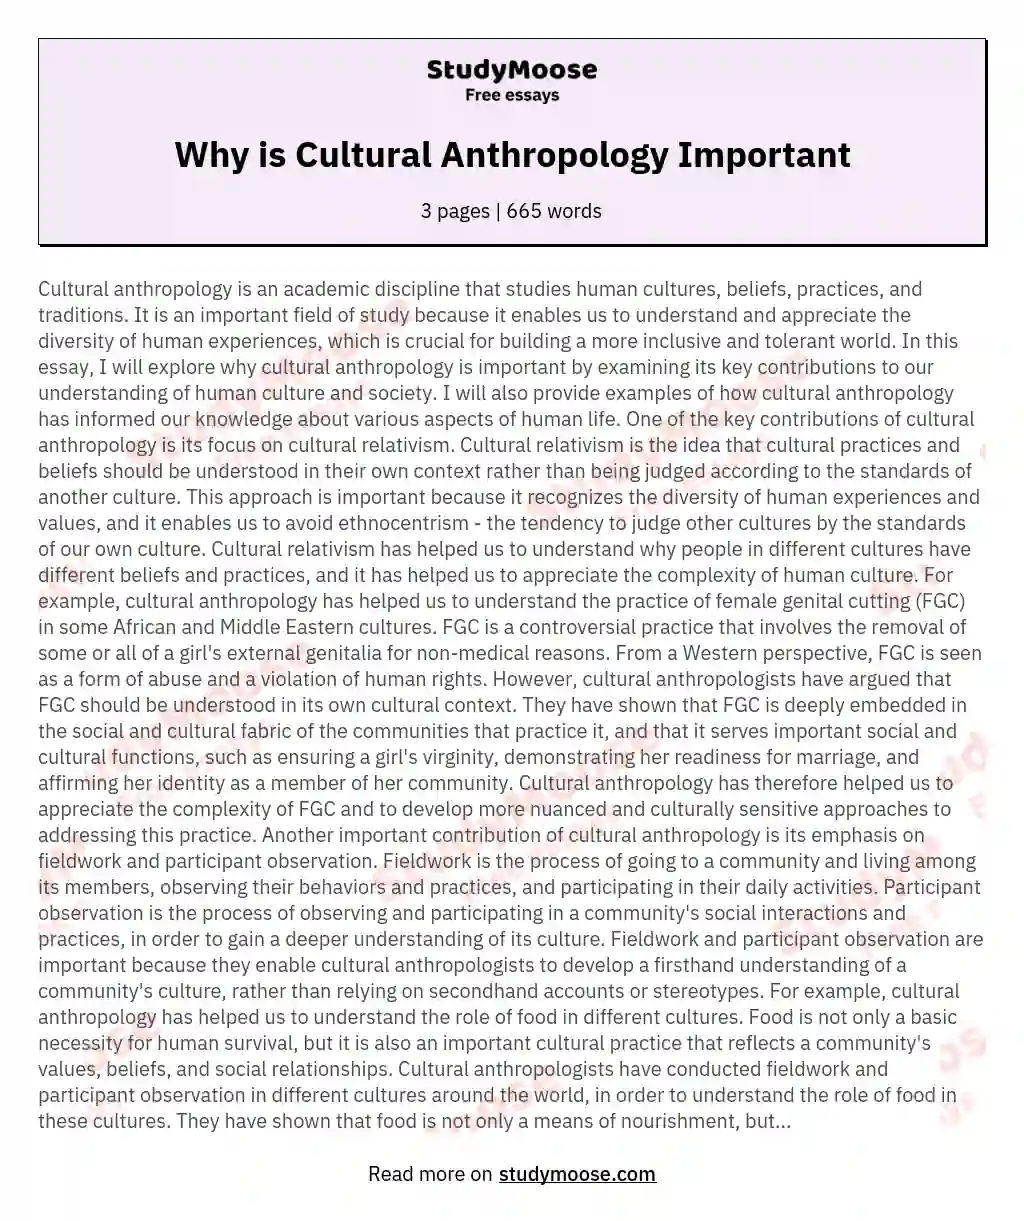 why is cultural anthropology important essay